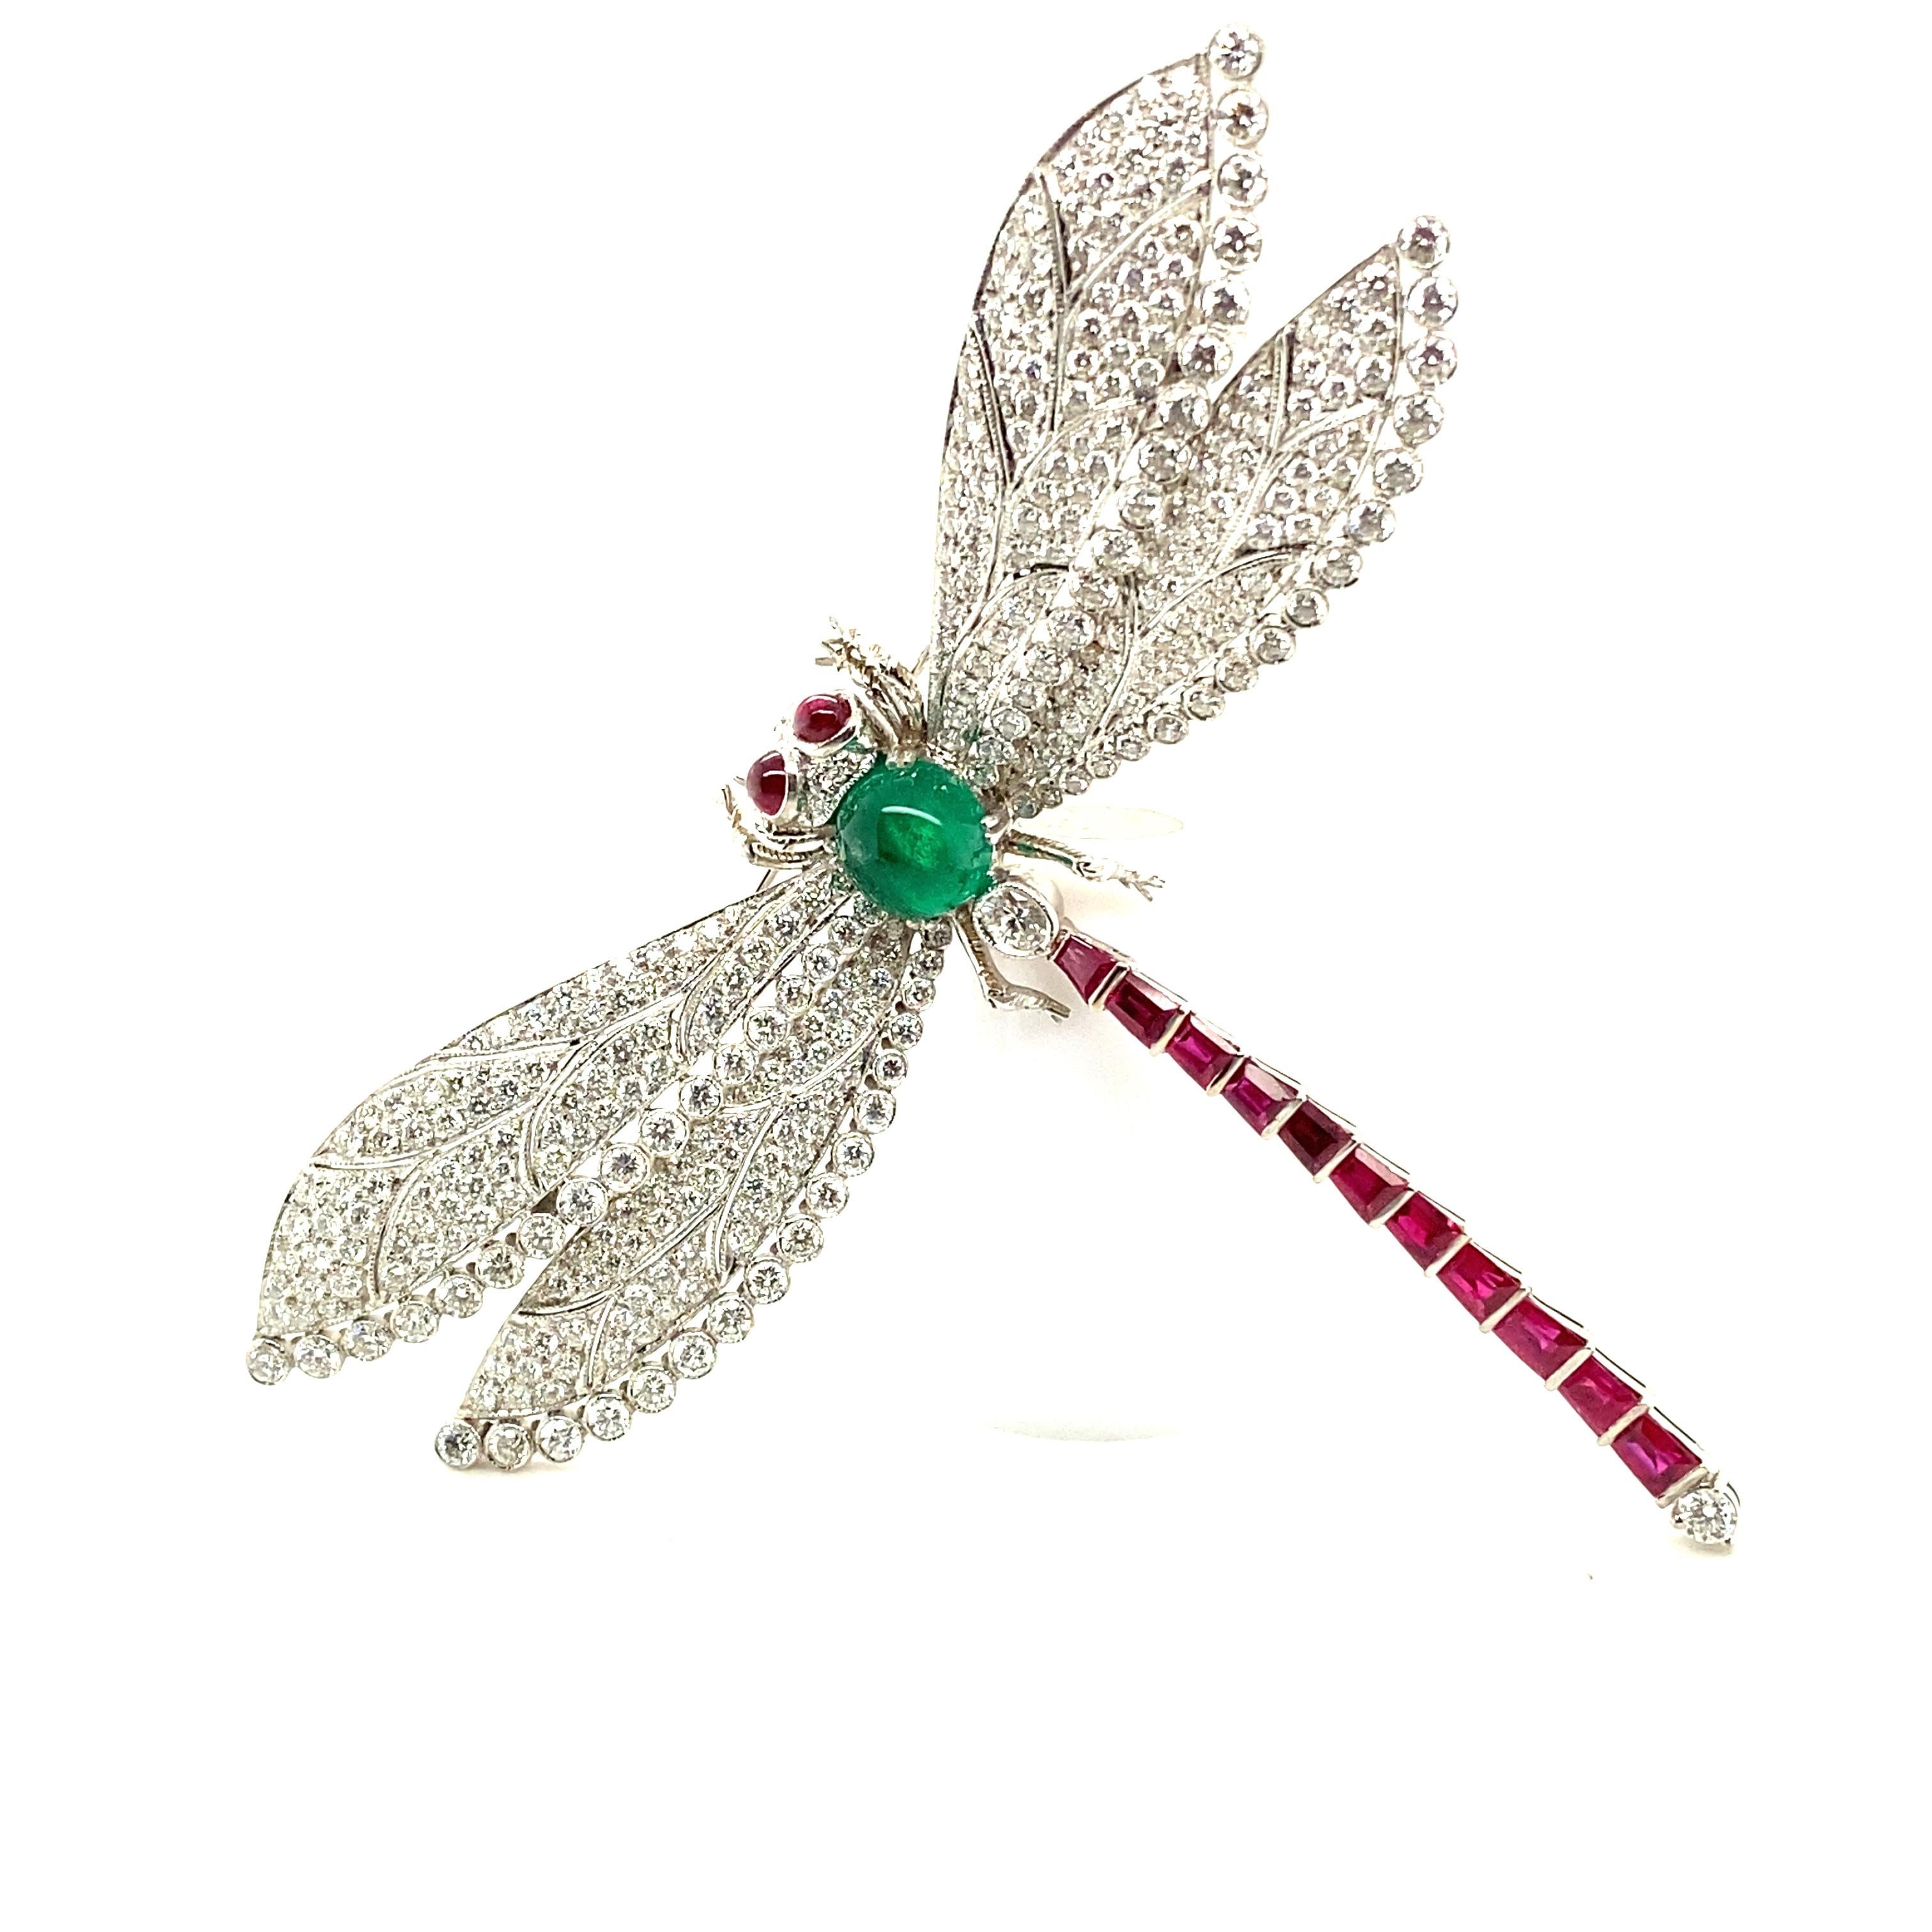 This spectacular and generously proportioned Art Deco style dragonfly brooch is crafted in 18 karat white gold and set with diamonds and vividly coloured gemstones.

The body is set with an emerald cabochon of approximately 2.90 carats and 13 round-